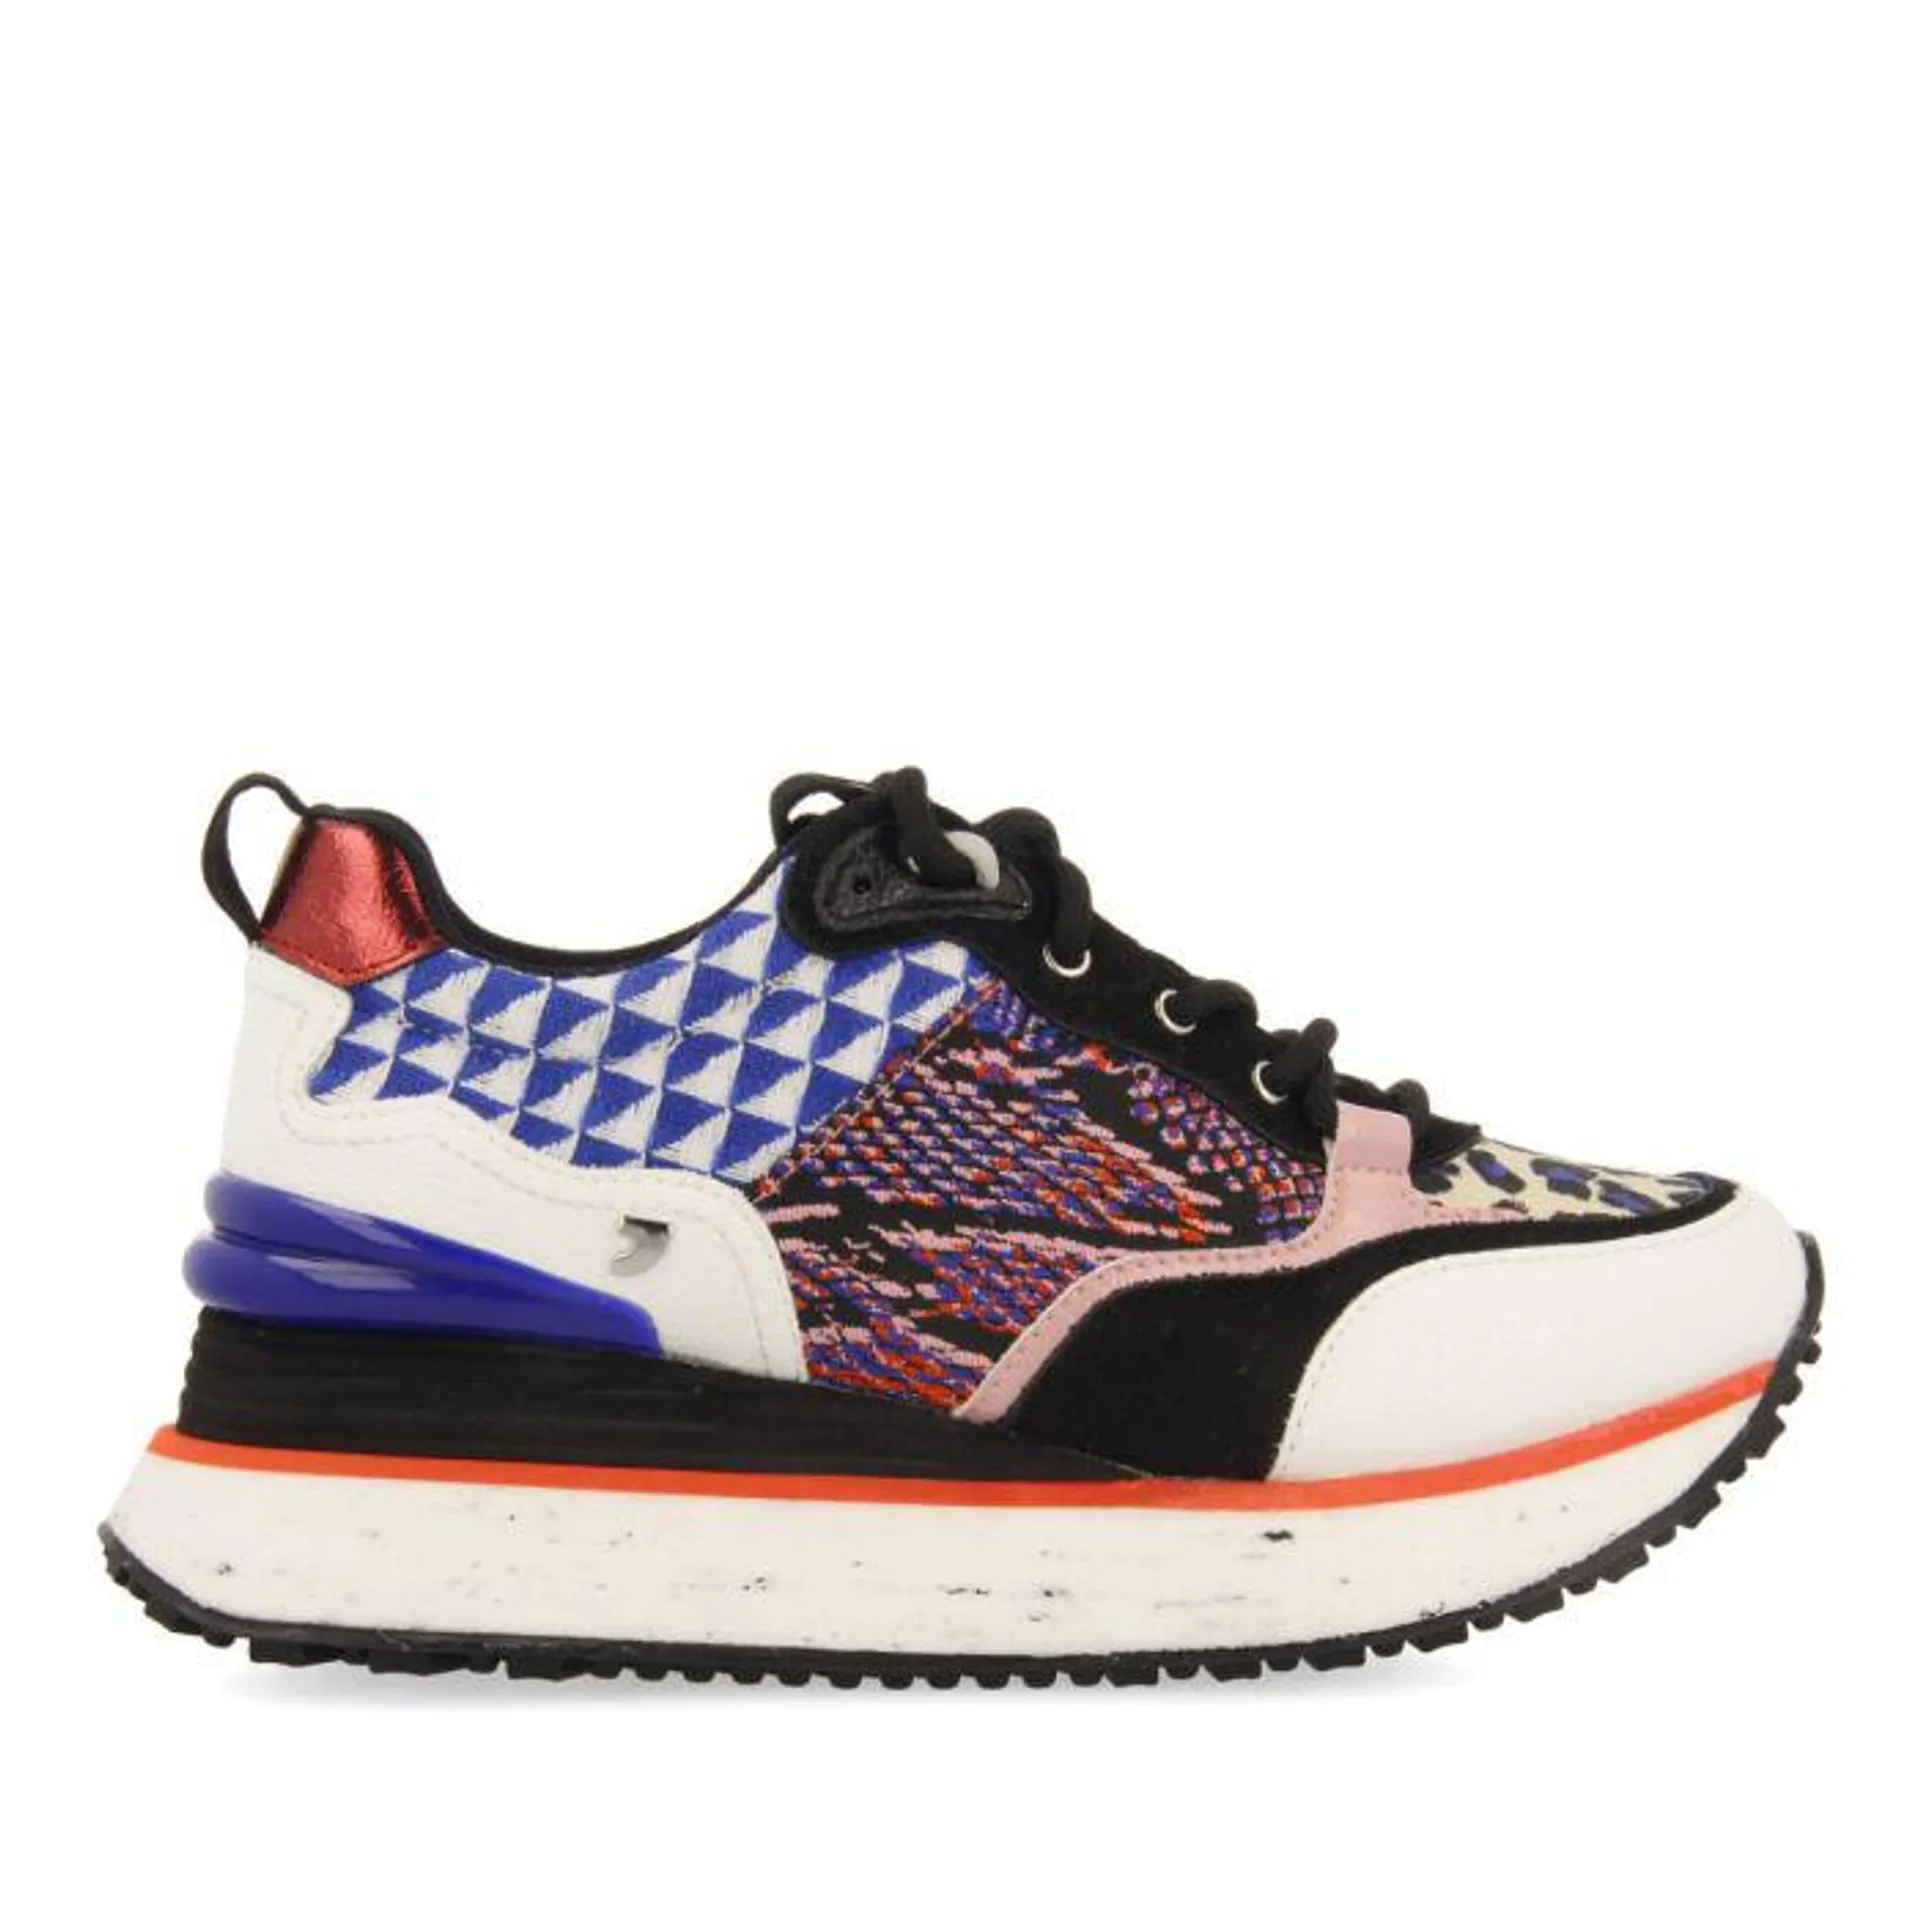 Bonnal women's multicoloured sneakers with black and white pieces and red, blue and pink details